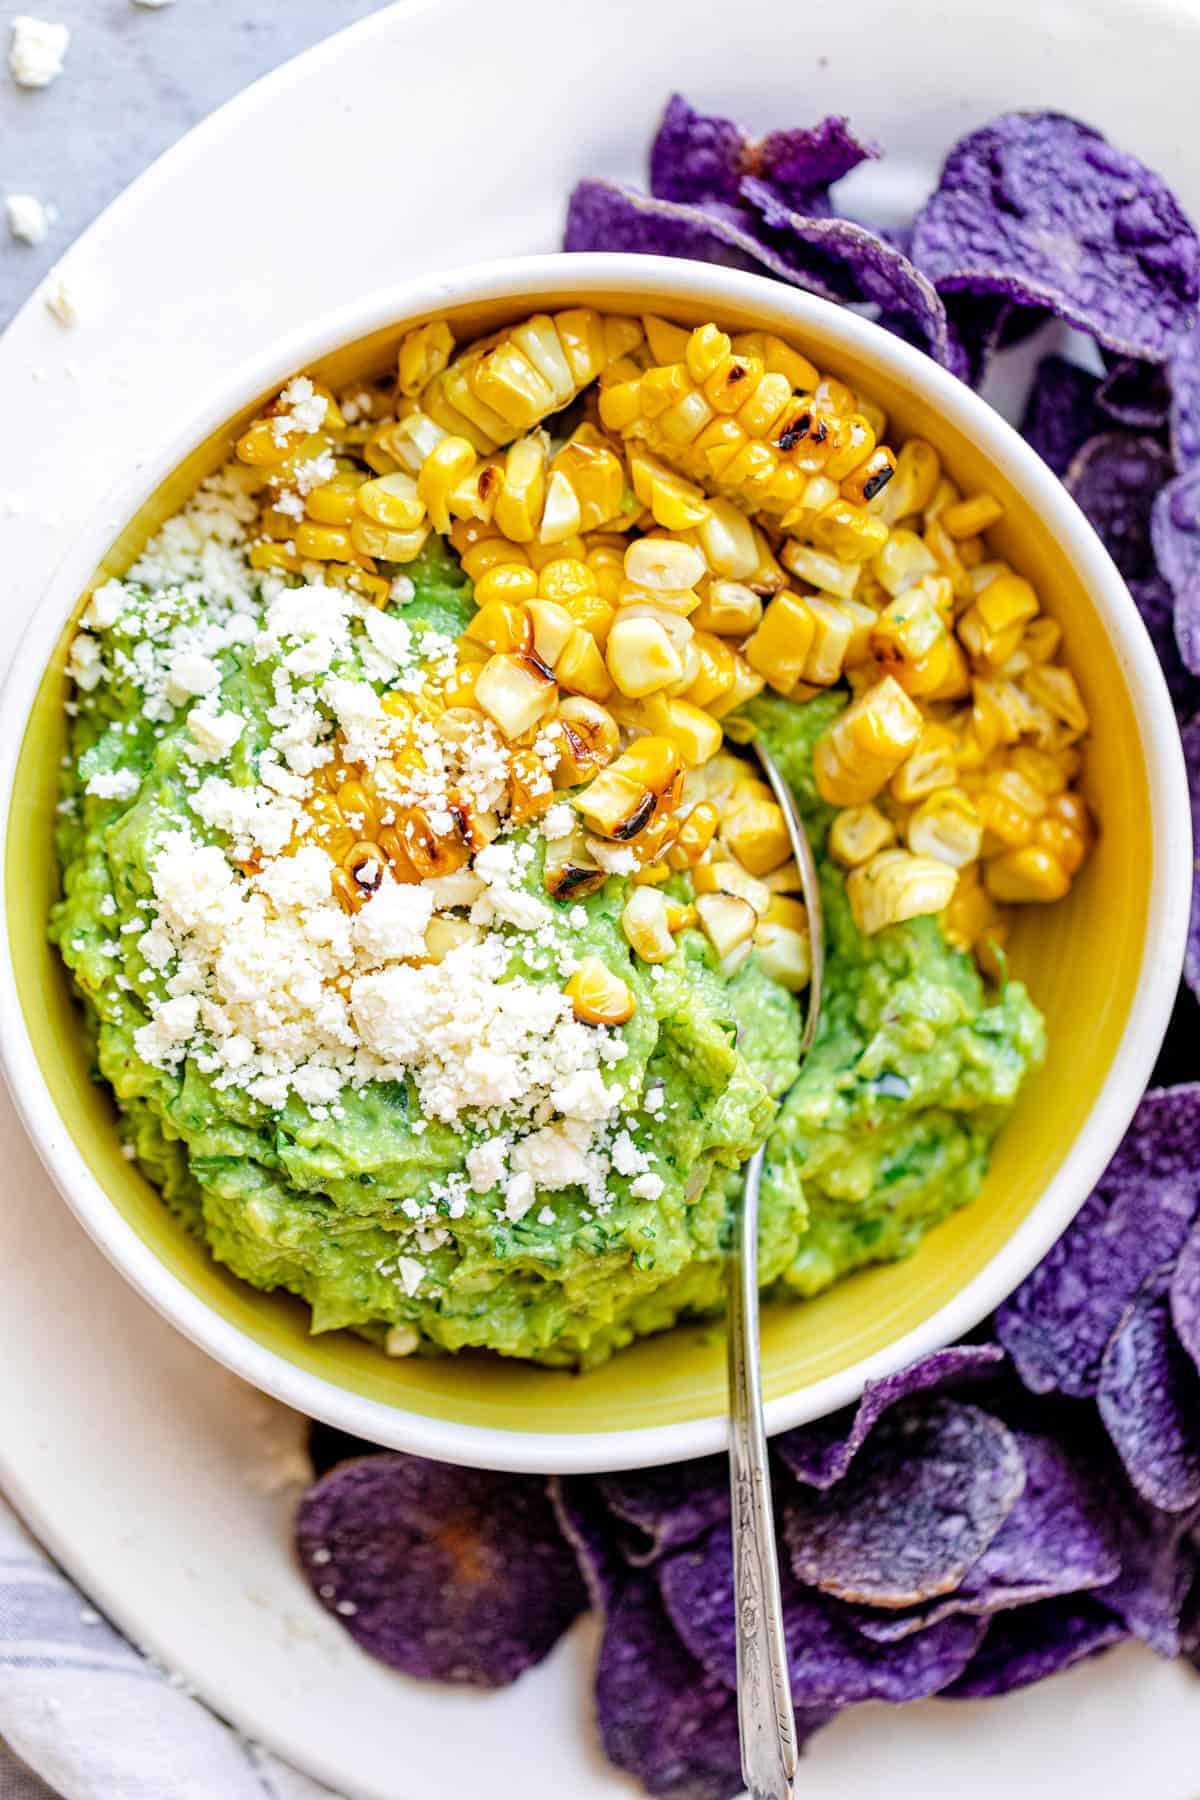 Finished bowl of guacamole up-close focusing on the grilled corn and the cheese